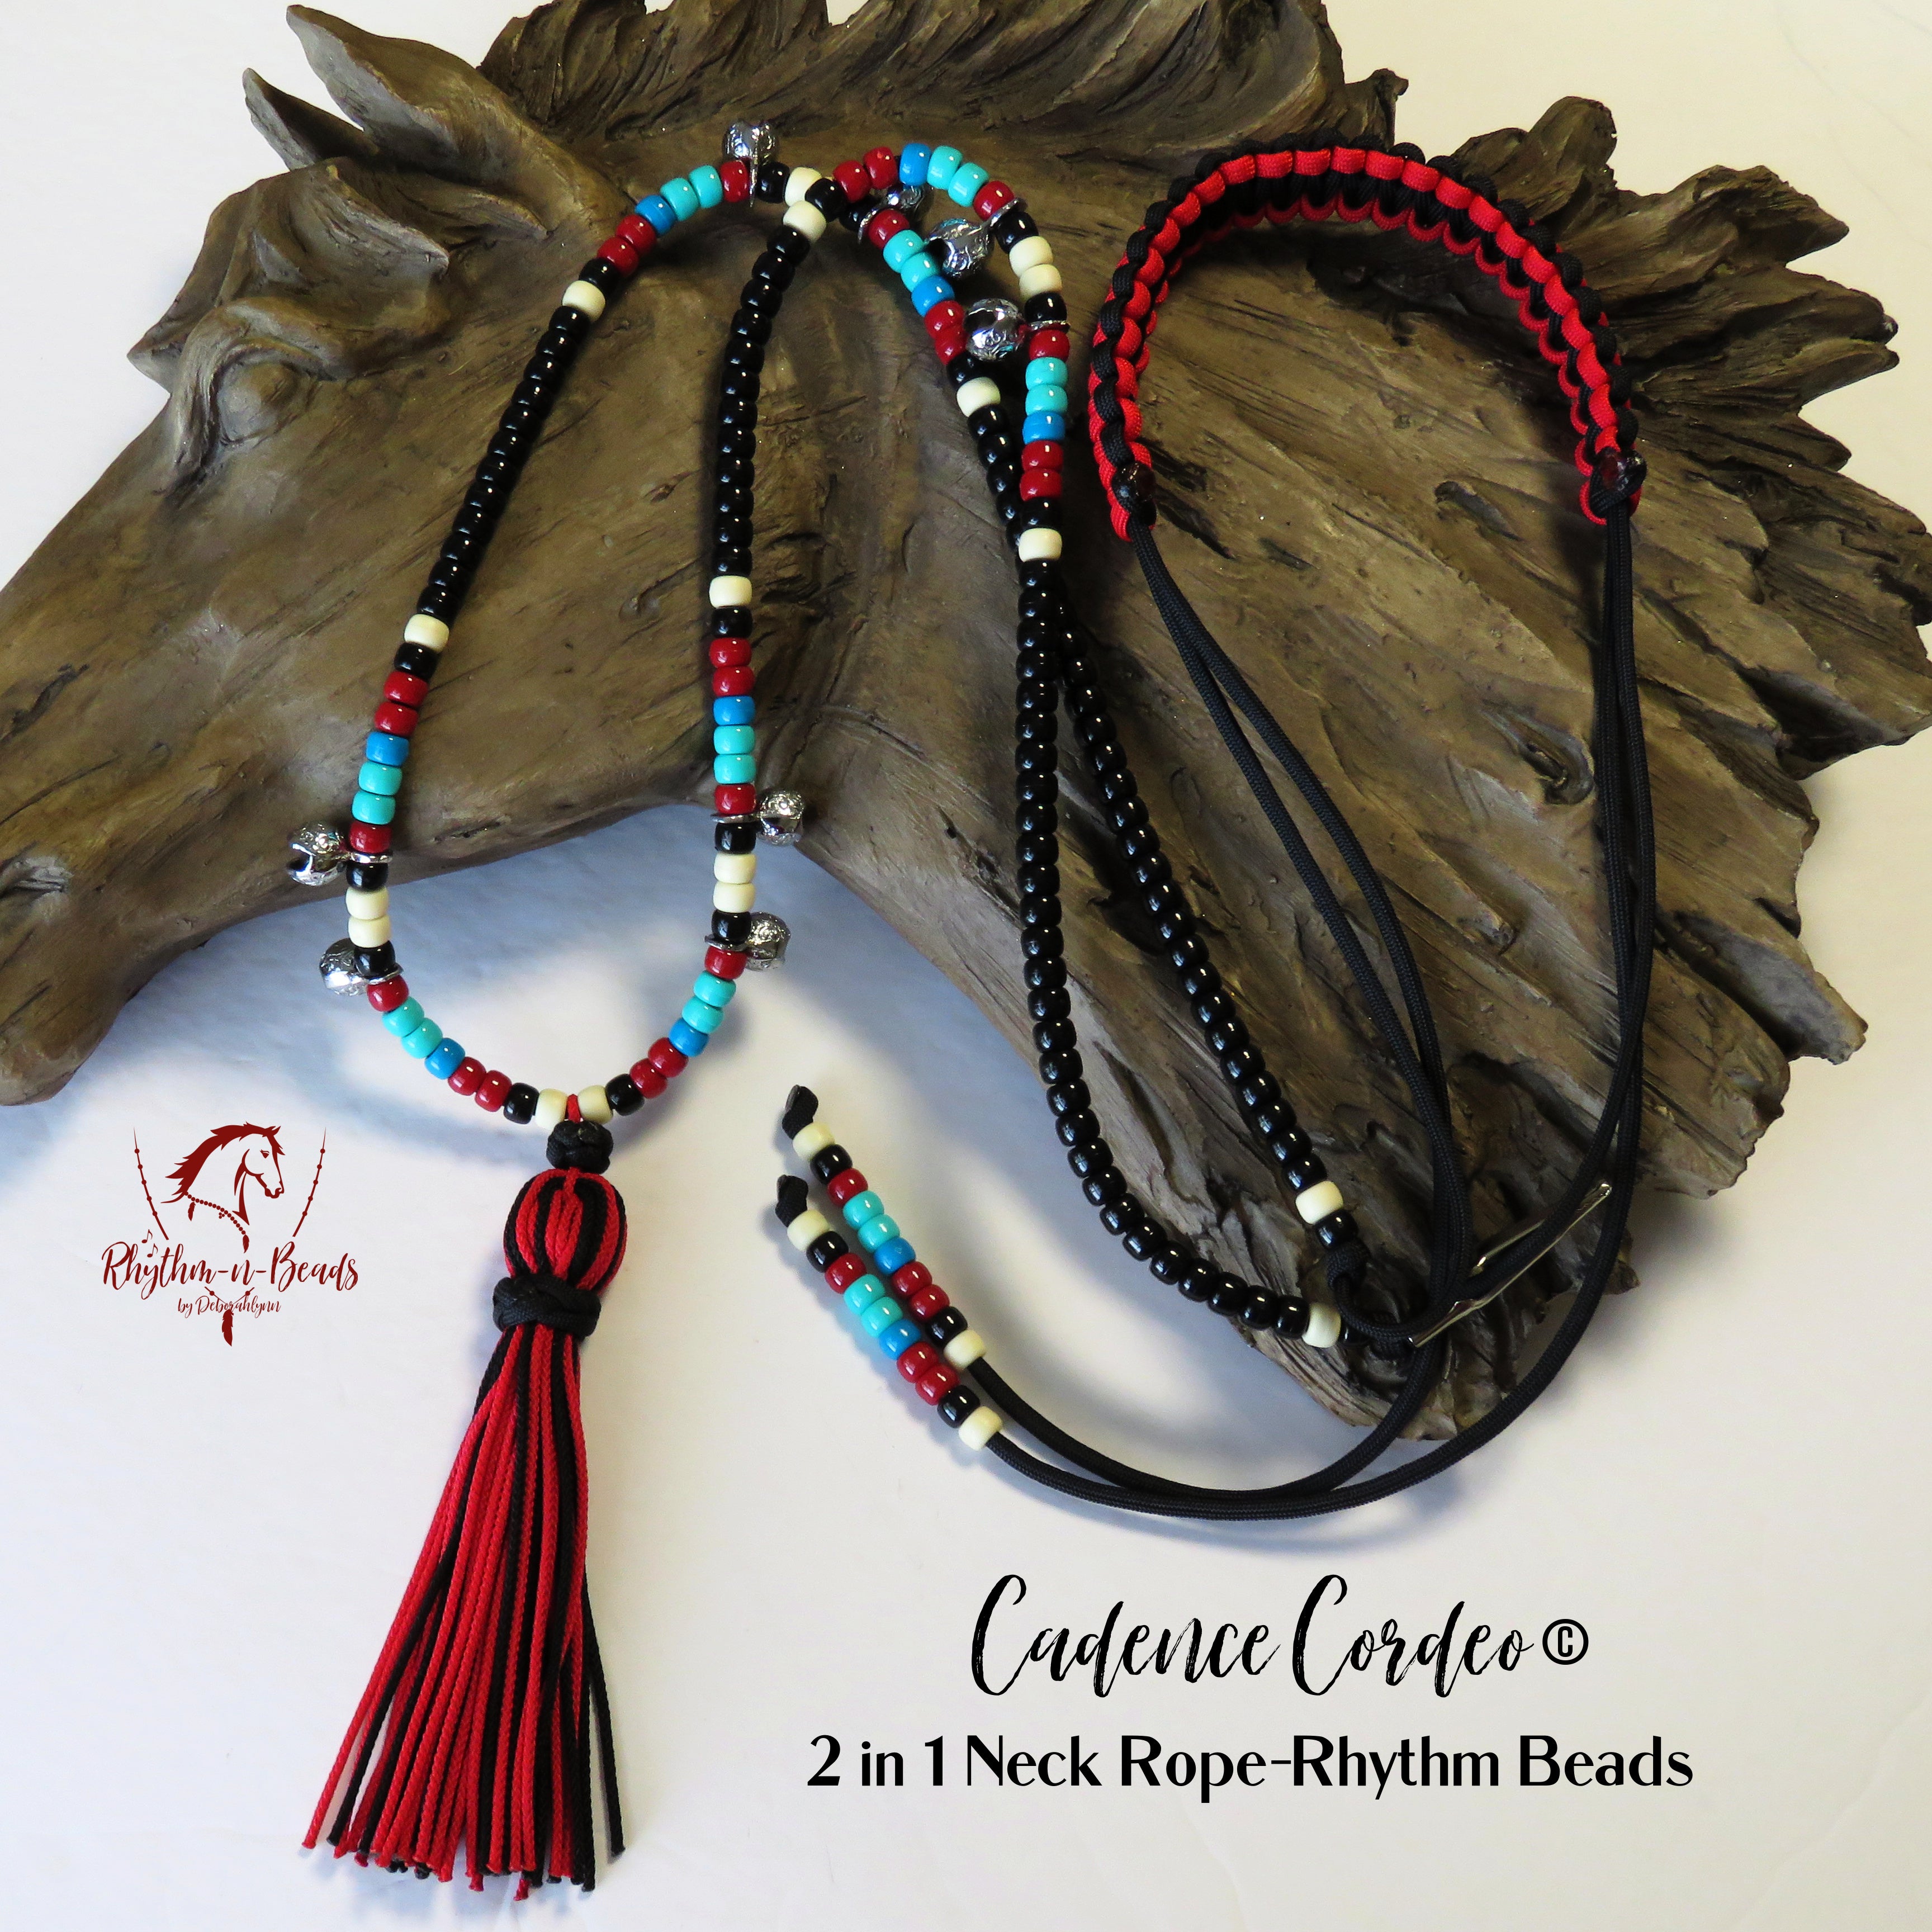 2 in 1 Cadence Cordeo© Neck Rope-Rhythm Bead Necklace - ZUNI